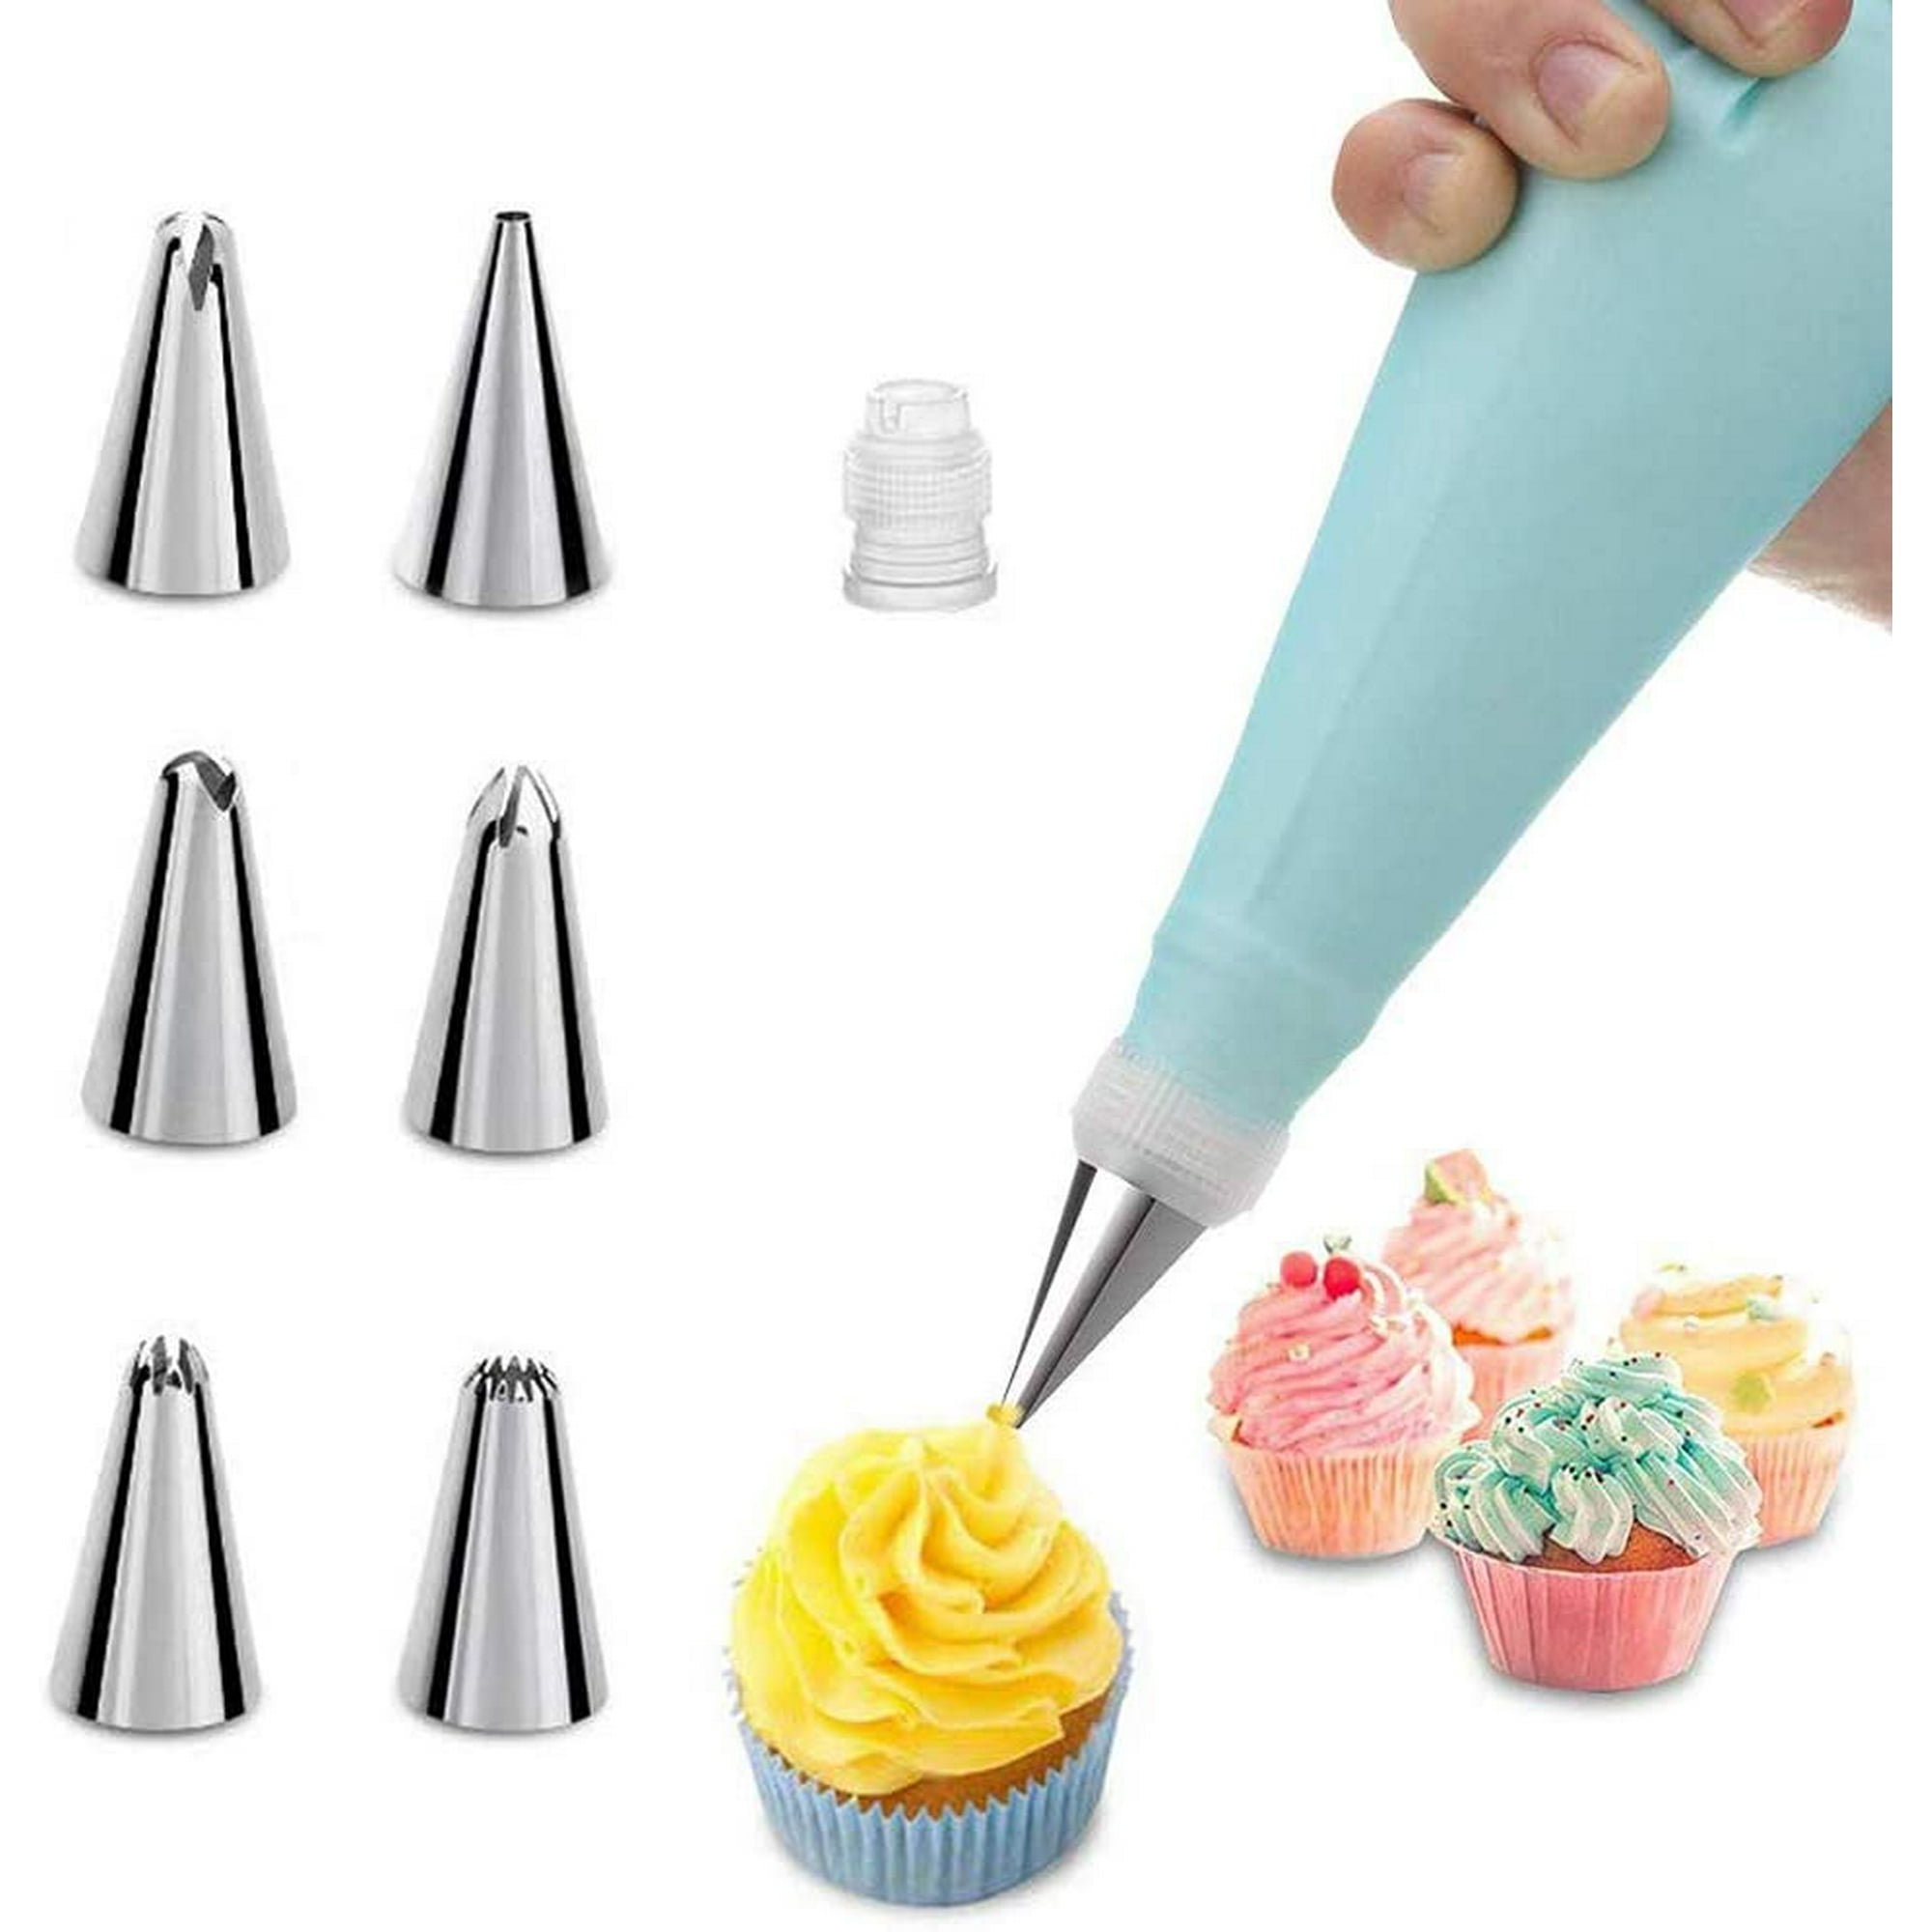 Squeeze Bag and Tips Cake Decoration Kit Baking Supplies - Walmart.com